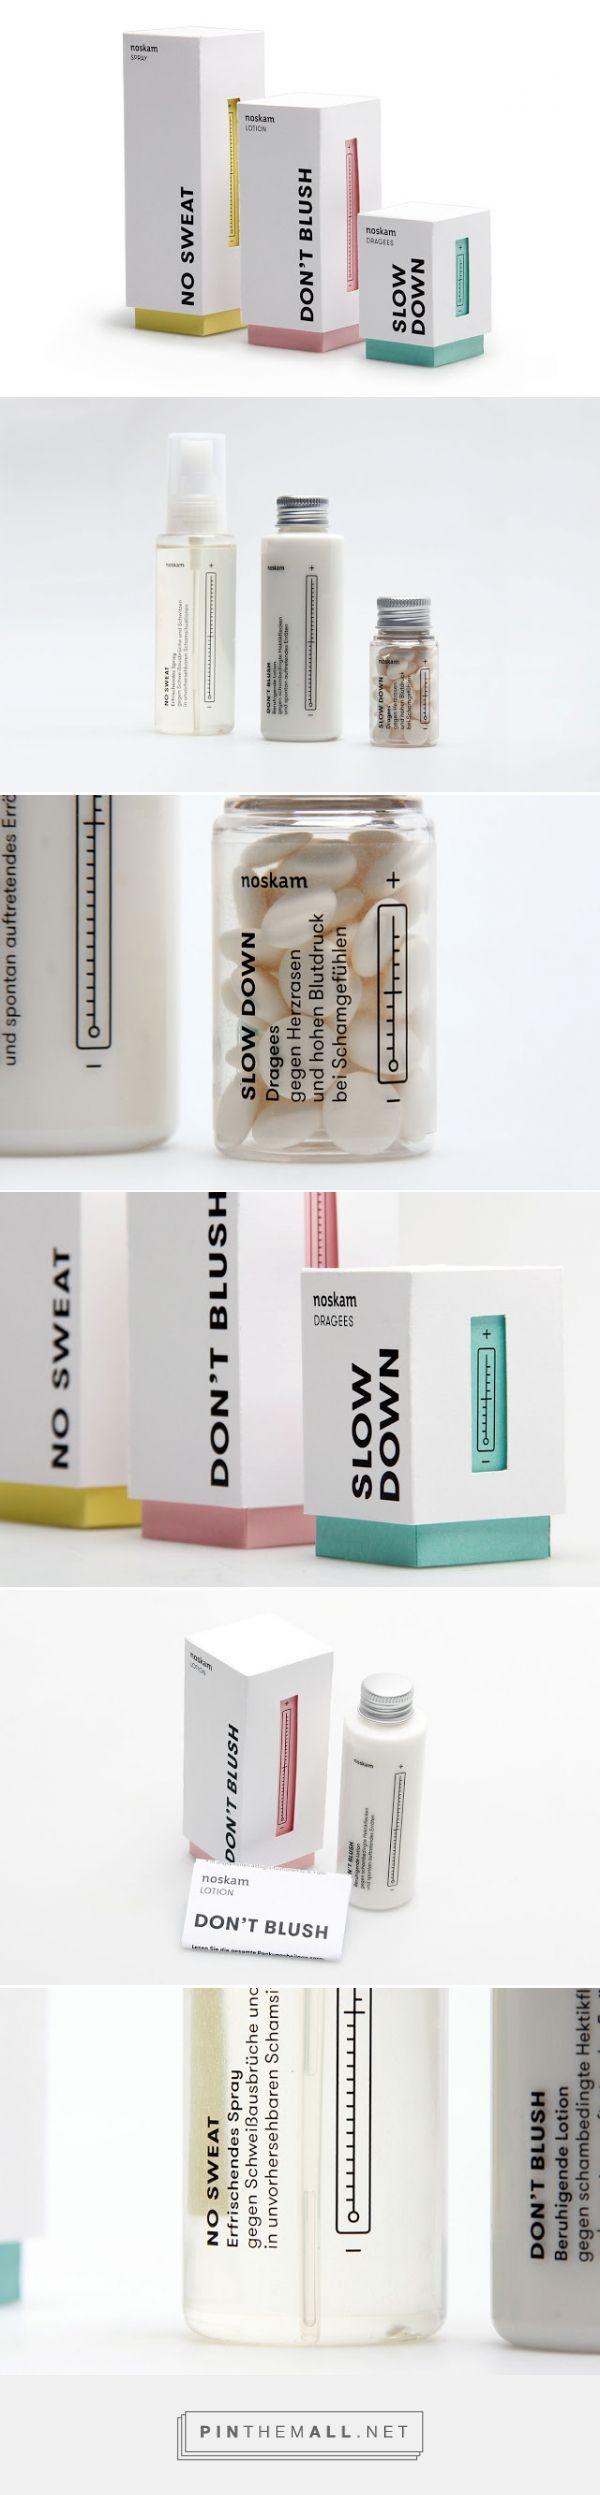 Hochzeit - Noskam Student Packaging Concept Designed By Muskat (Germany) - Http://www.packagingoftheworld.com/2016/01/noskam-student-project.html... - A Grouped Images Picture